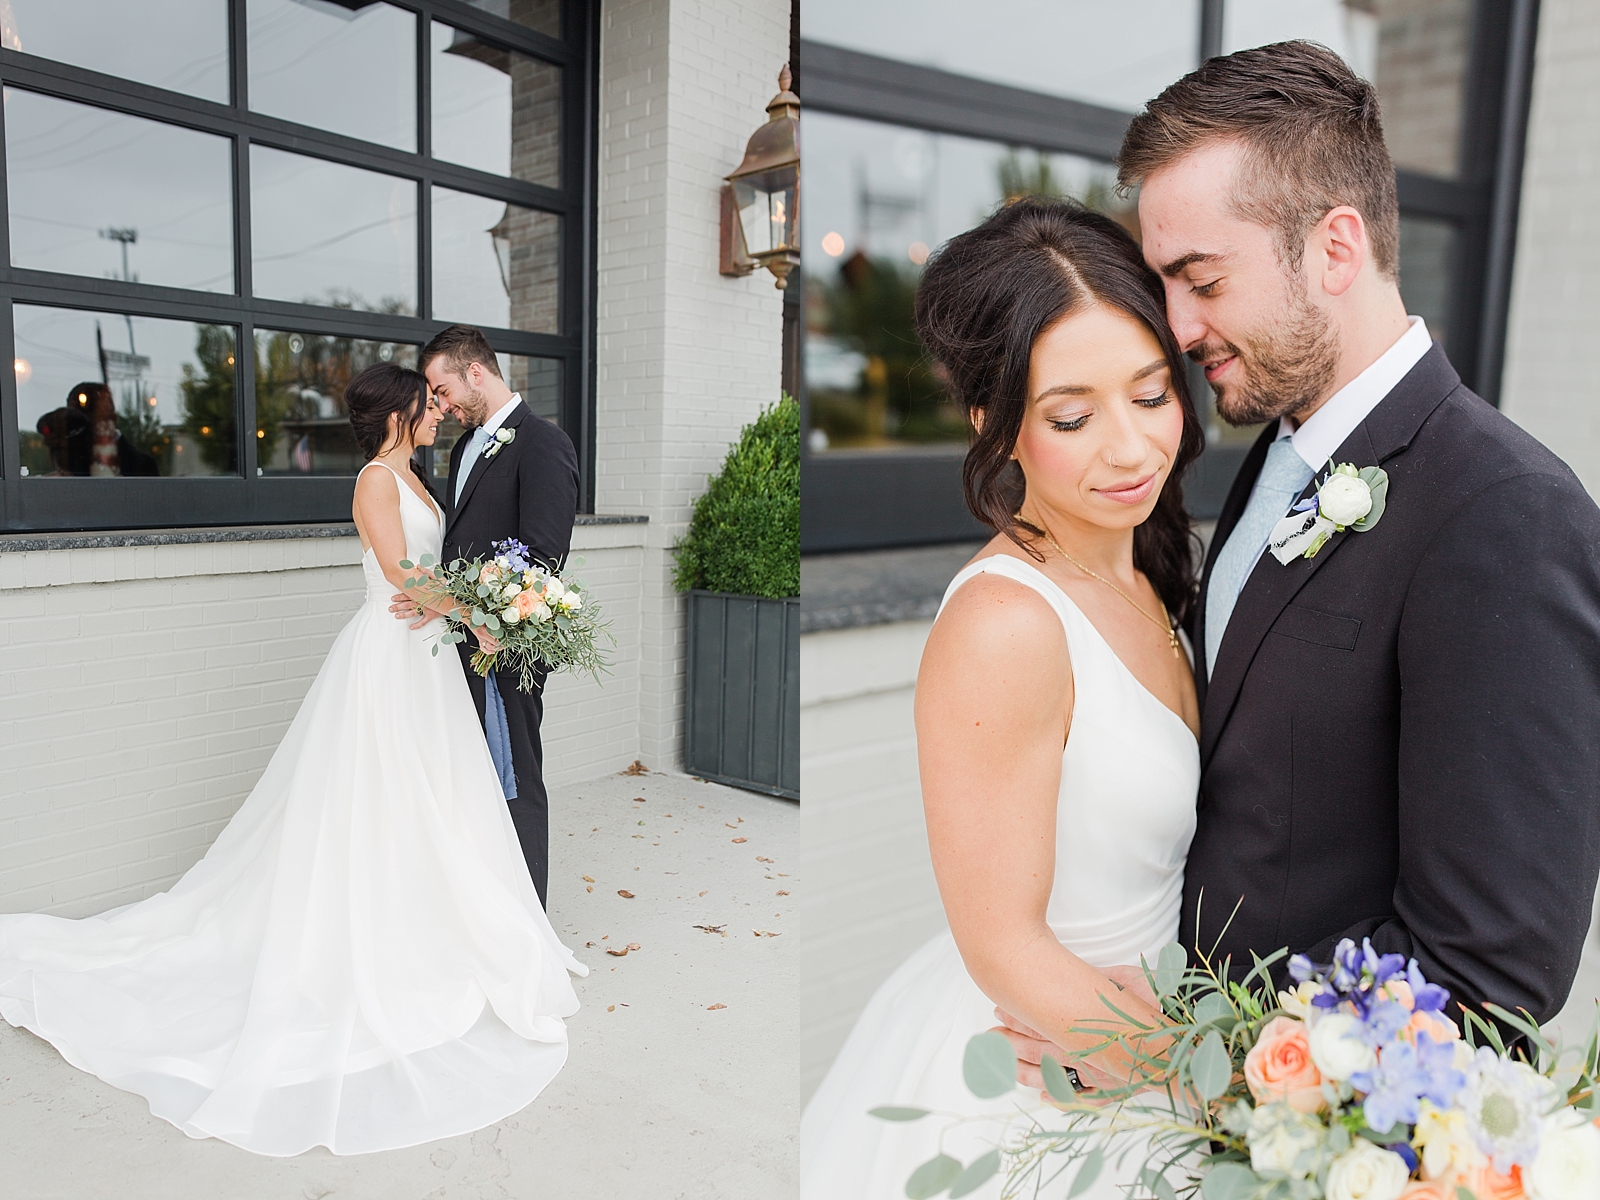 Glover Park Brewery Wedding Bride and Groom snuggling in front of venue Photos